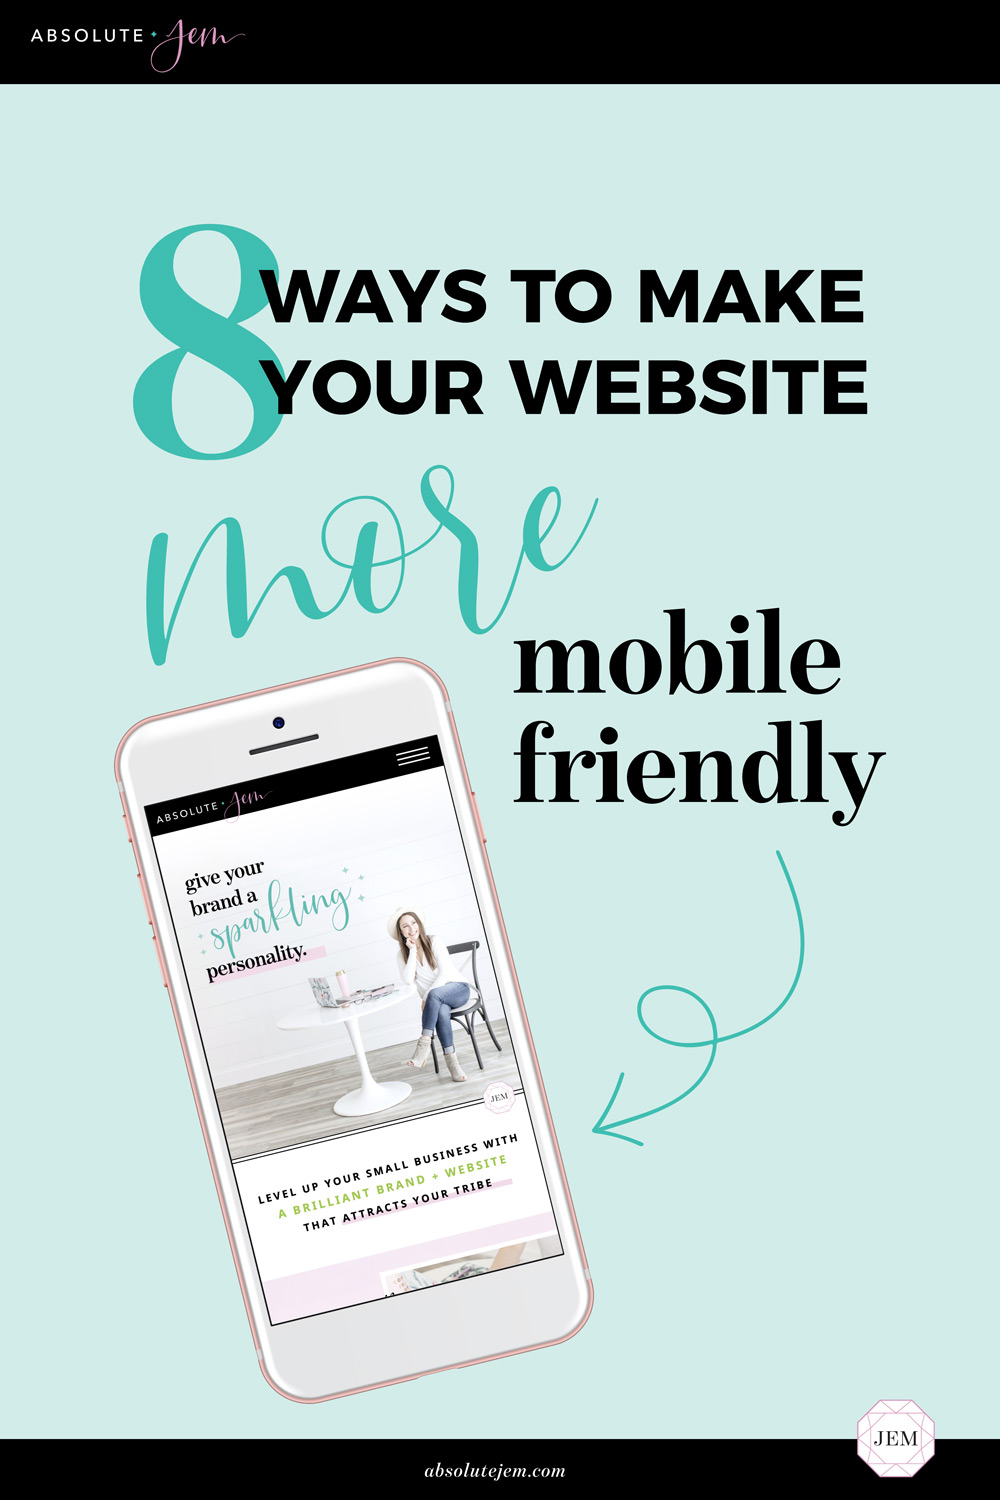 How To Make Your Website More Mobile Friendly